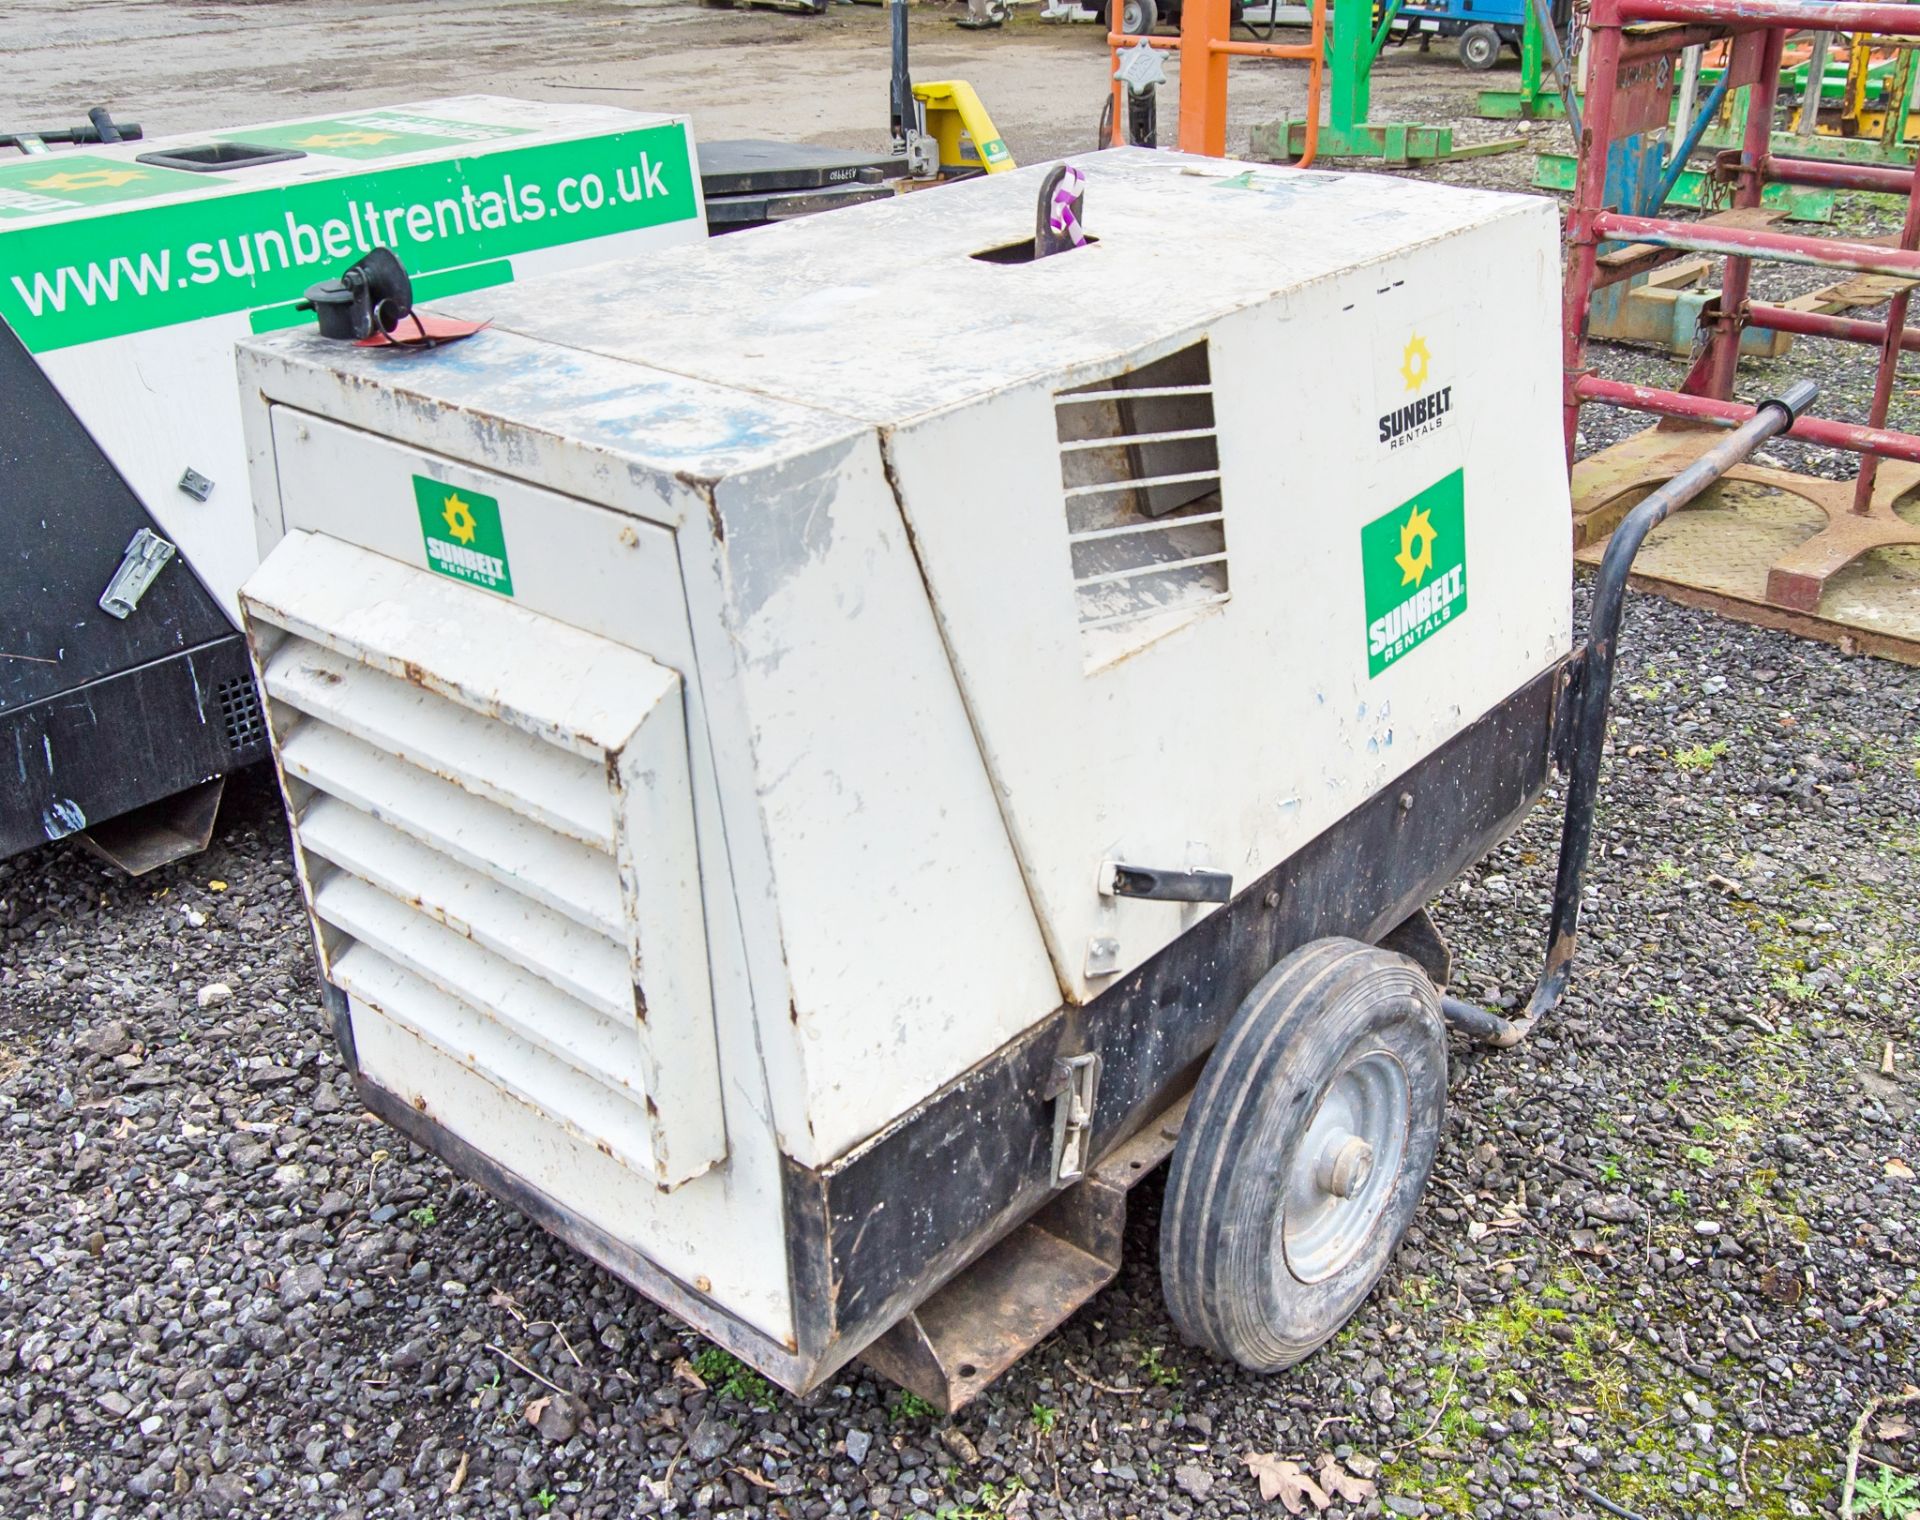 MHM MG1000 SSK-V 10 kva diesel driven generator S/N: 229170005 Recorded hours: 4459 A782872 - Image 2 of 4